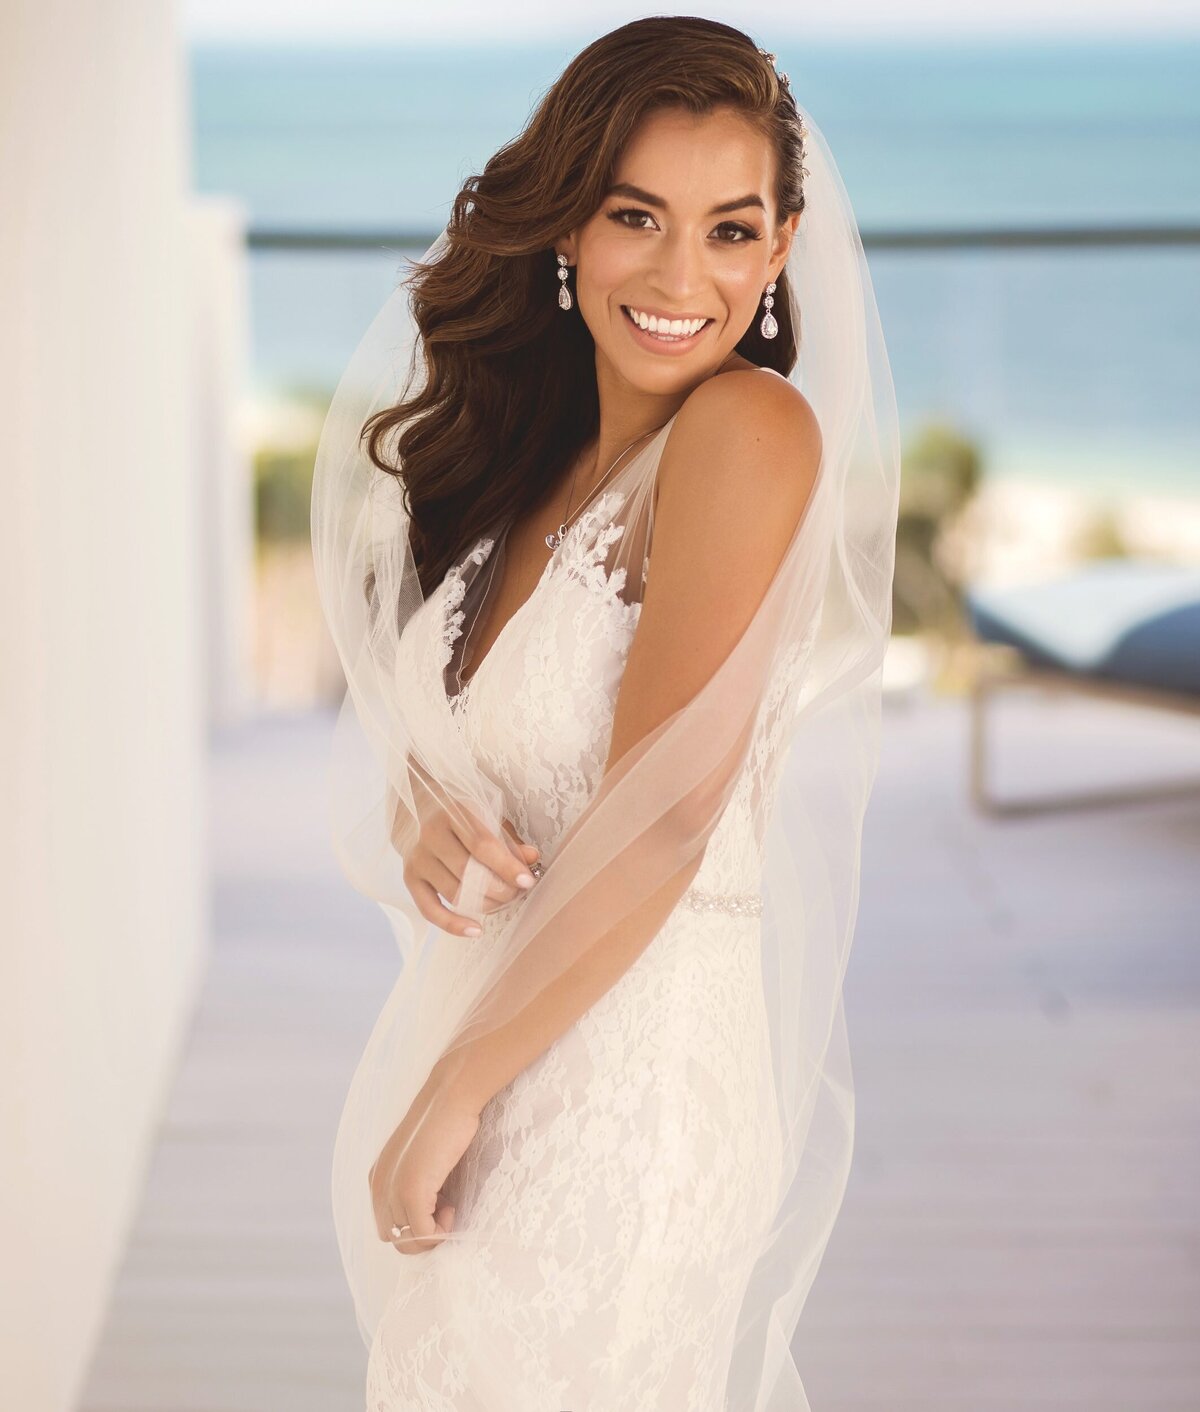 Portrait of bride before her wedding in Cancun